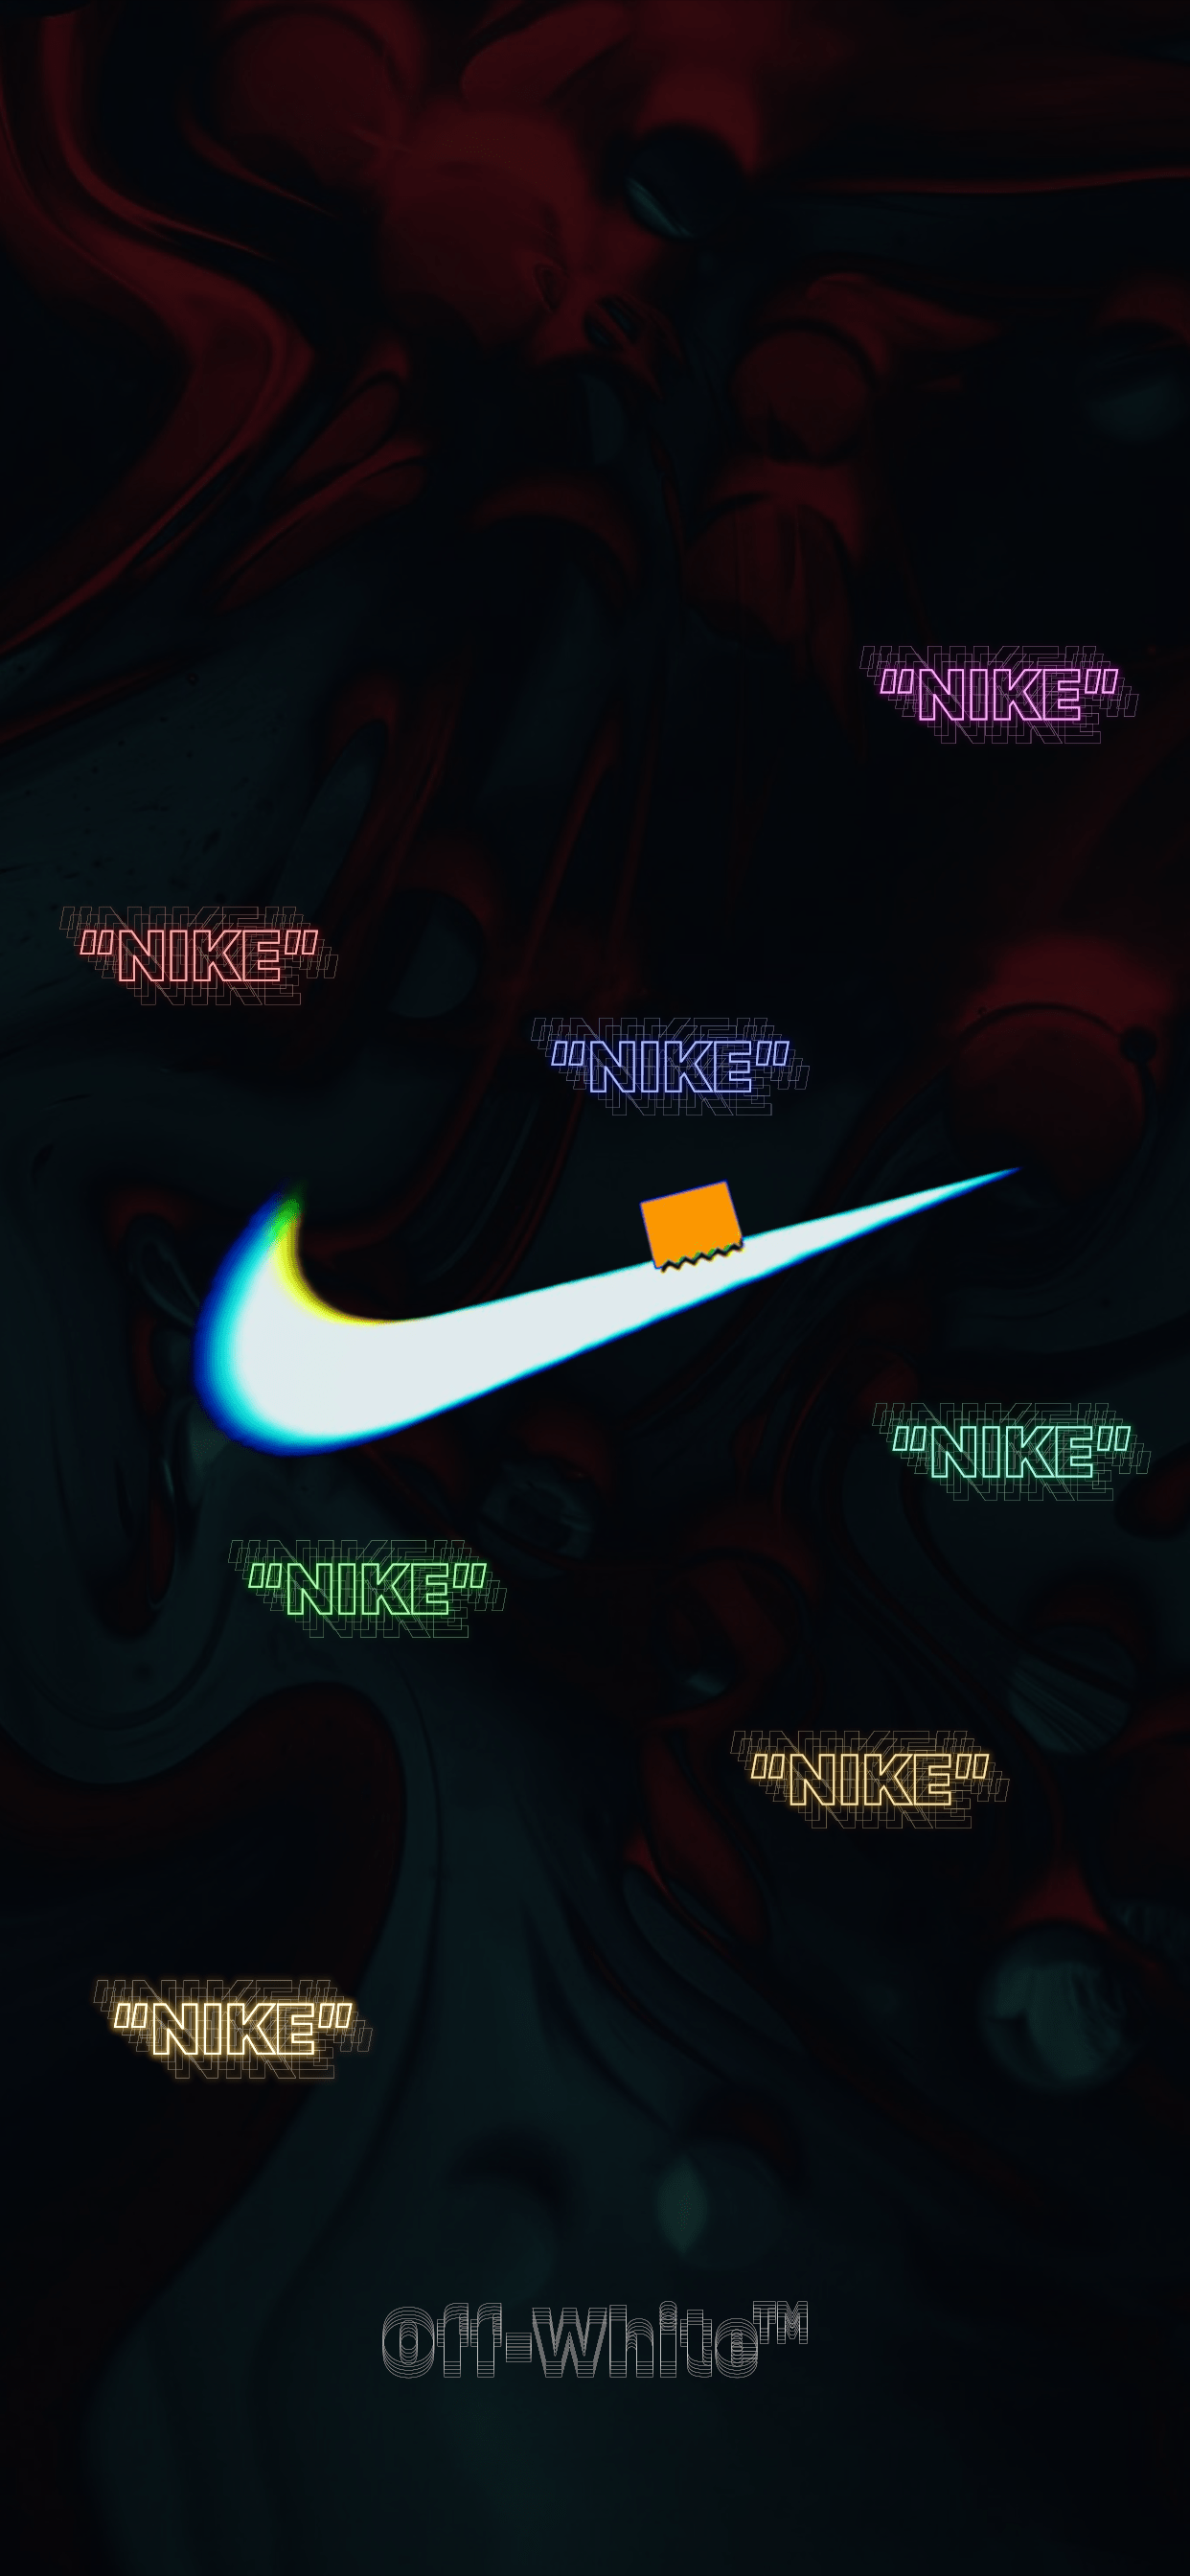 A Nike wallpaper for your phone - Off-White, Nike